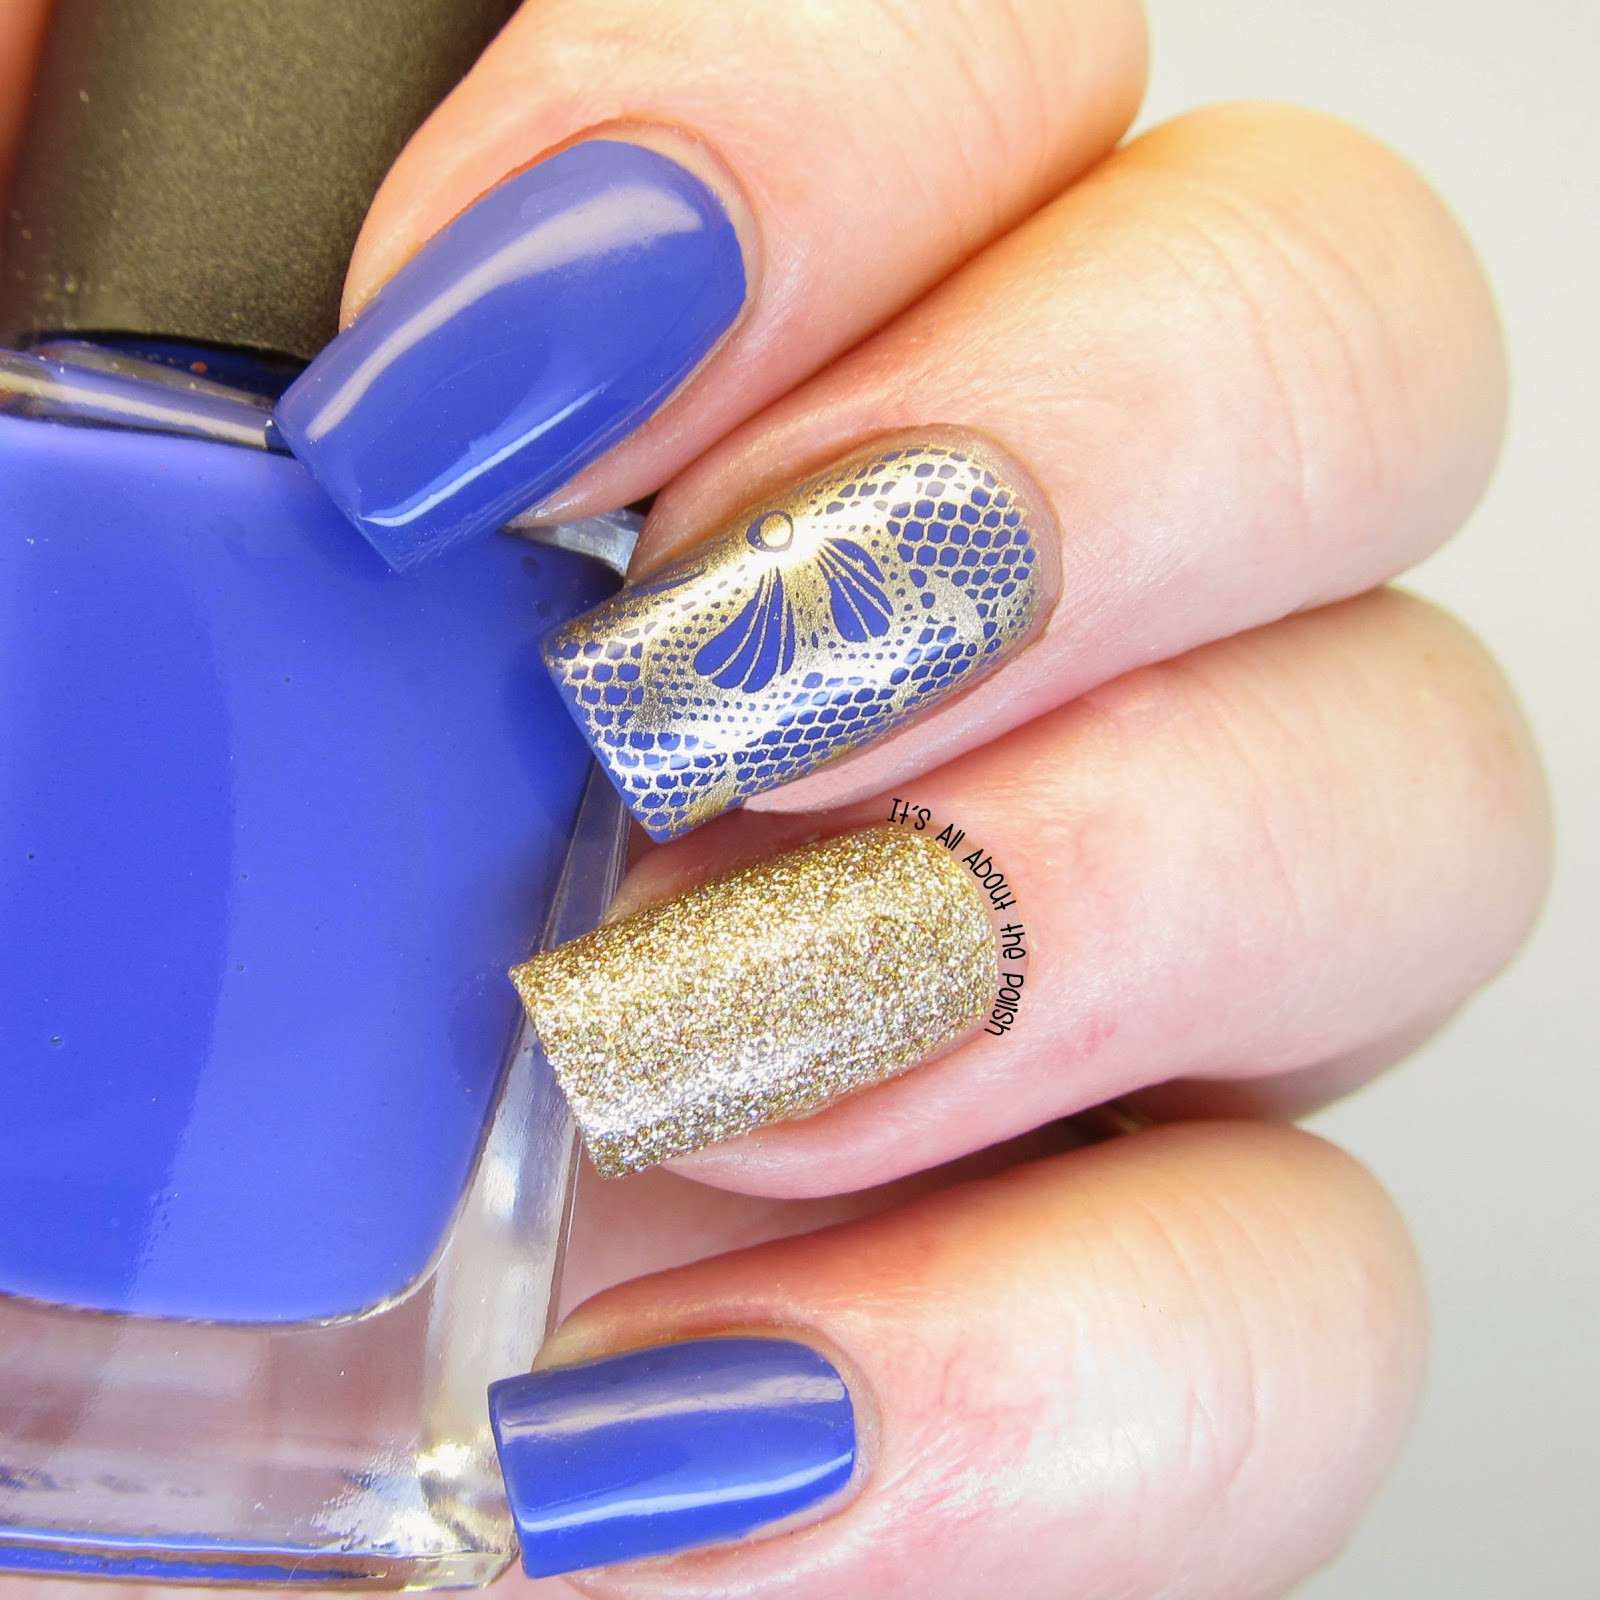 Periwinkle Nail Designs
 It s all about the polish Periwinkle blue and lace nail